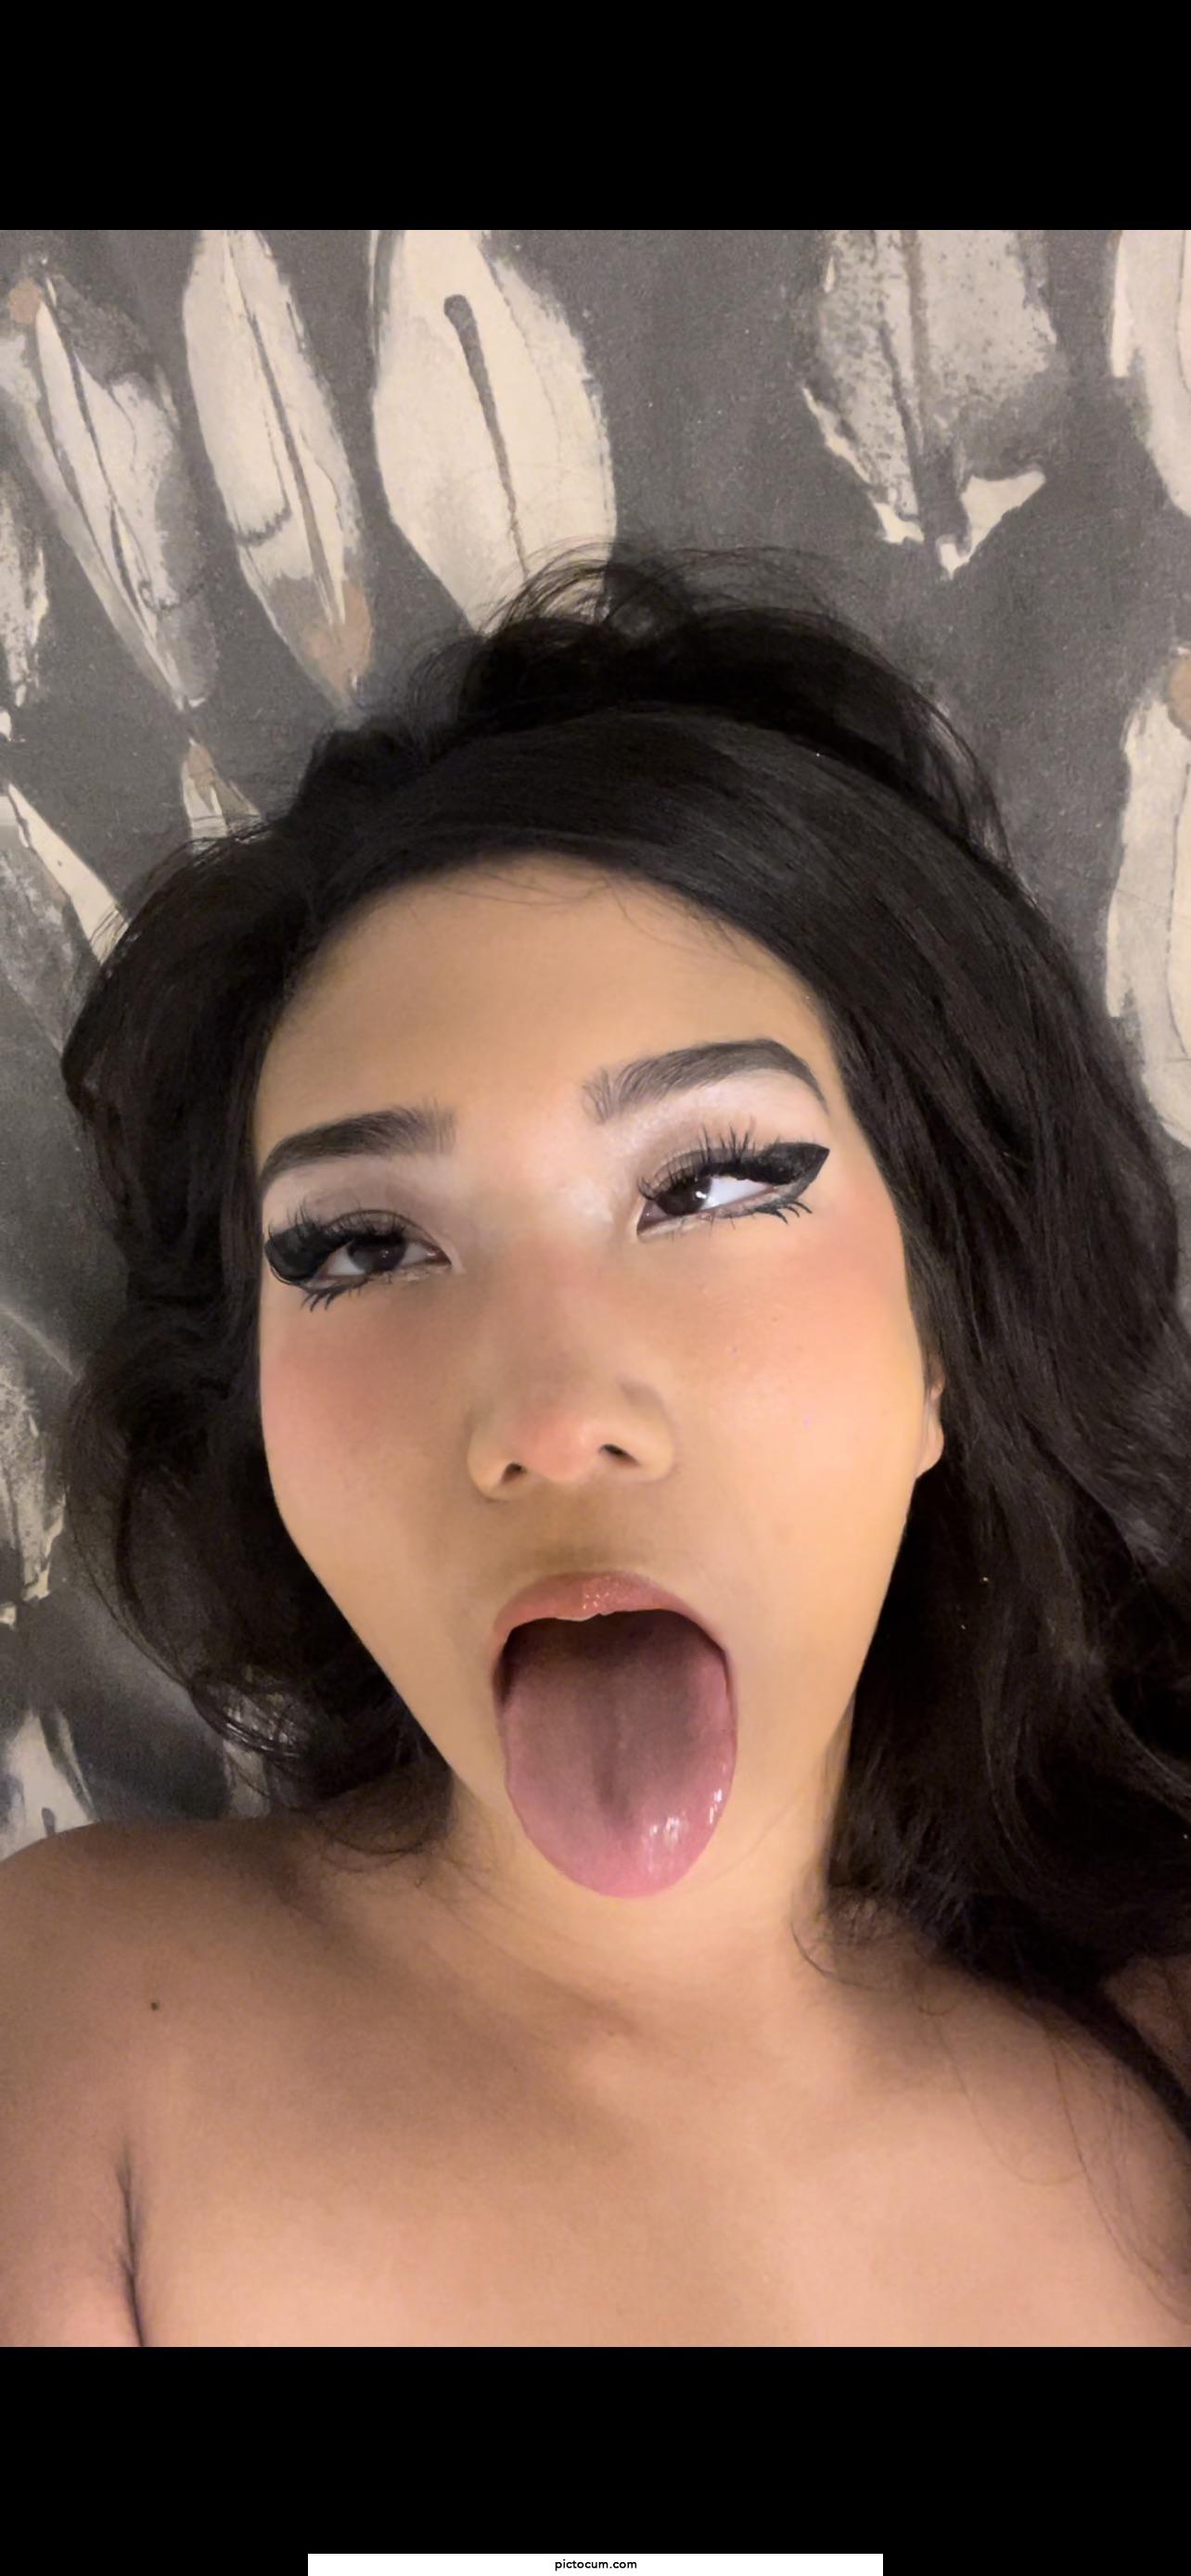 My first attempt at ahegao. How did I do?